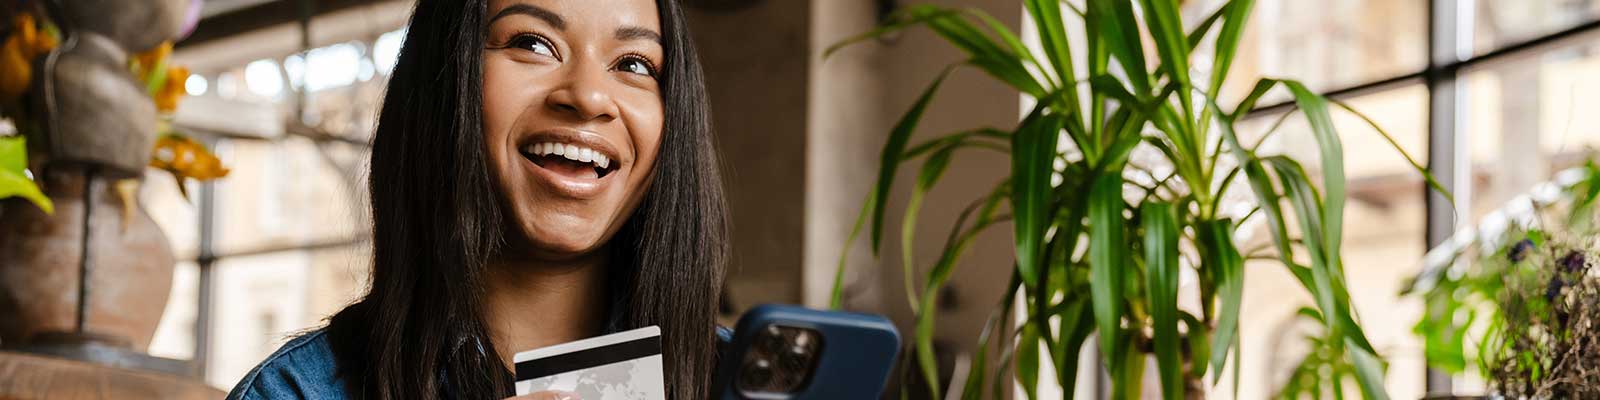 Young woman with a phone and debit card